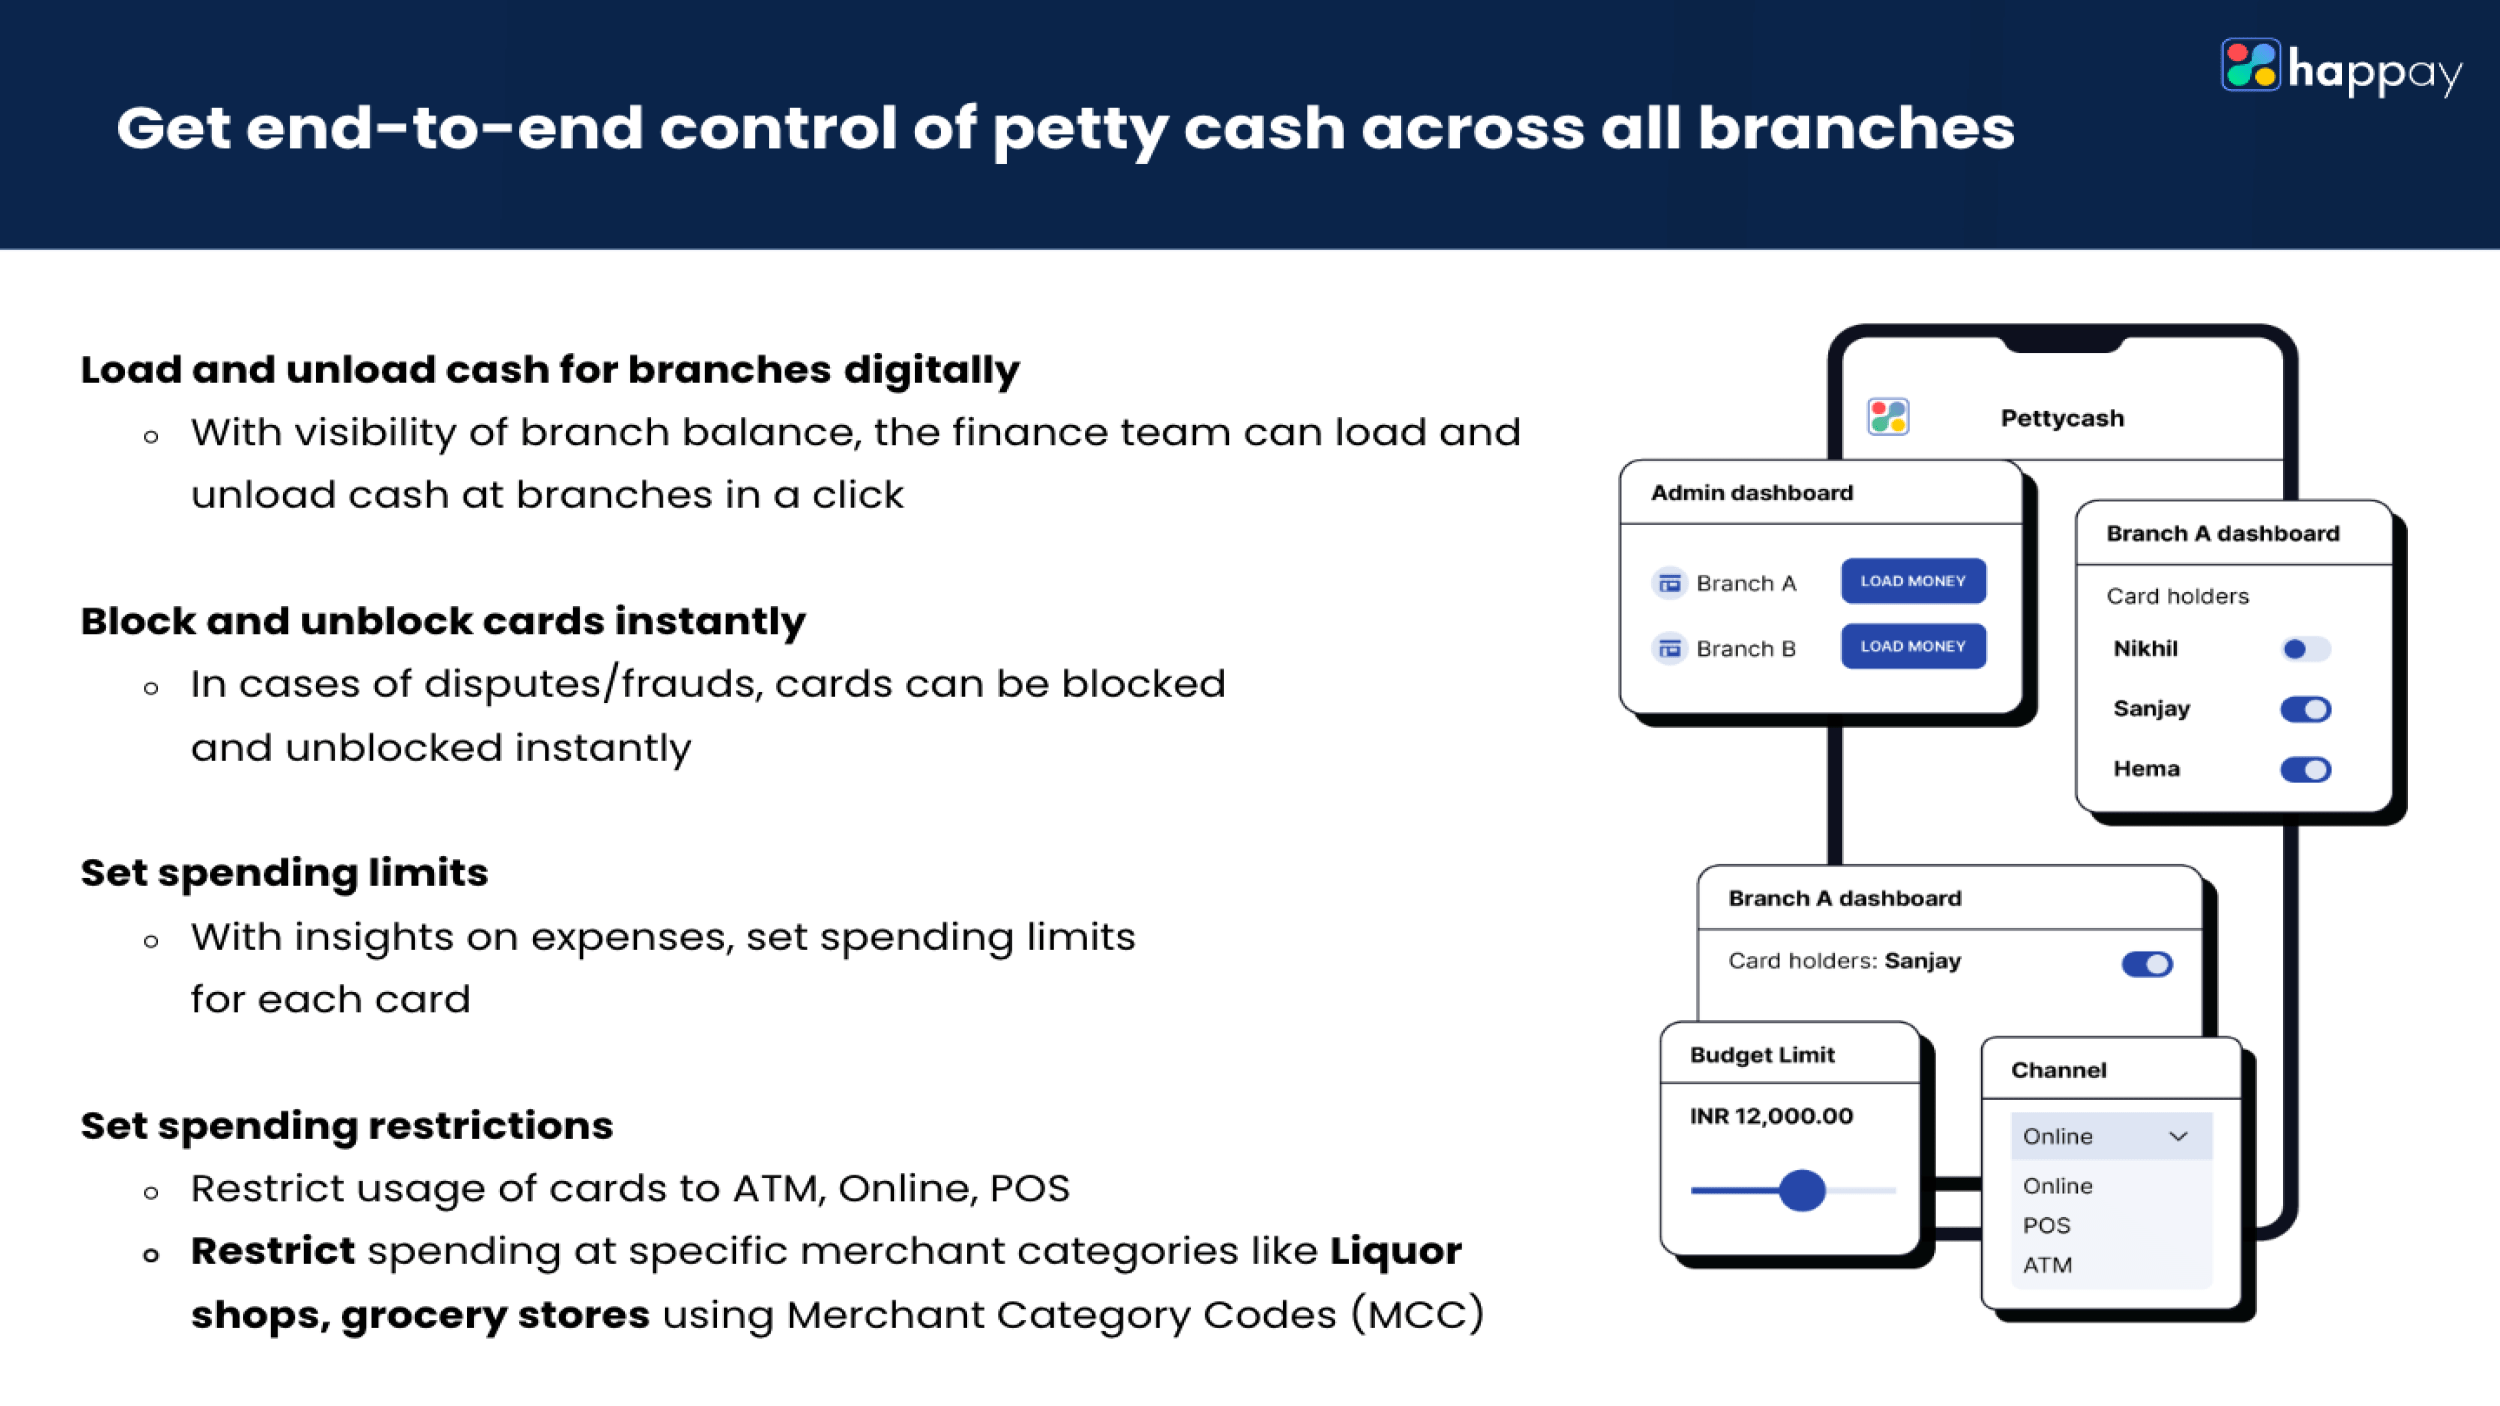 get-end-to-end-control-of-petty-cash-across-all-branches